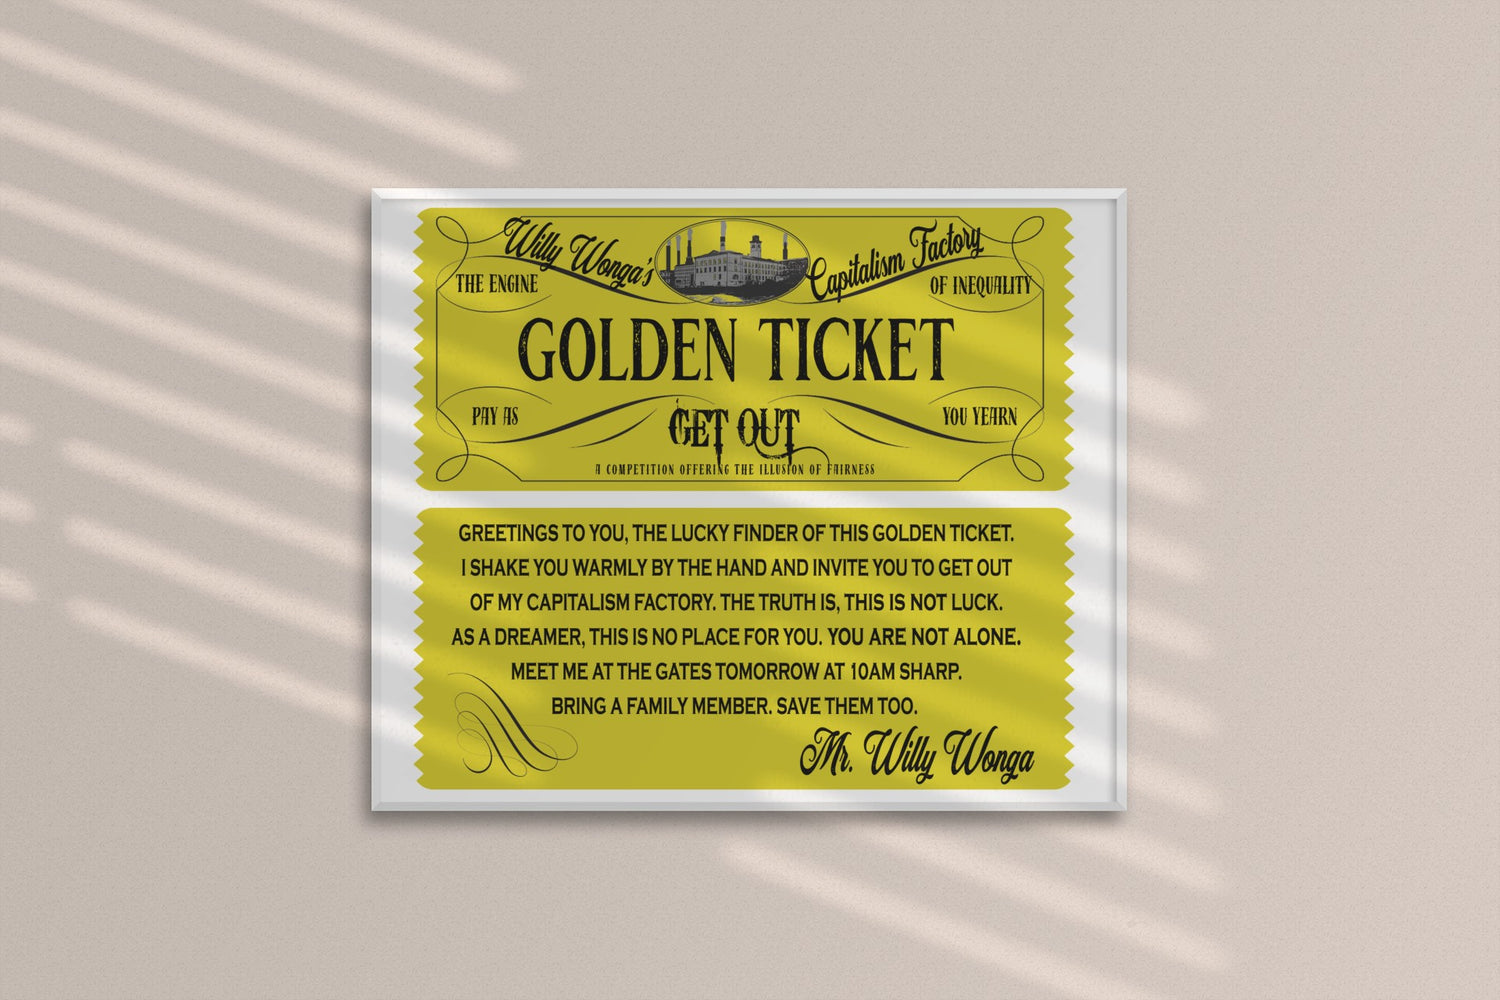 Ben Cowan's Willy Wonga's Golden Ticket OUT of the Capitalism Factory Art That Makes You Think